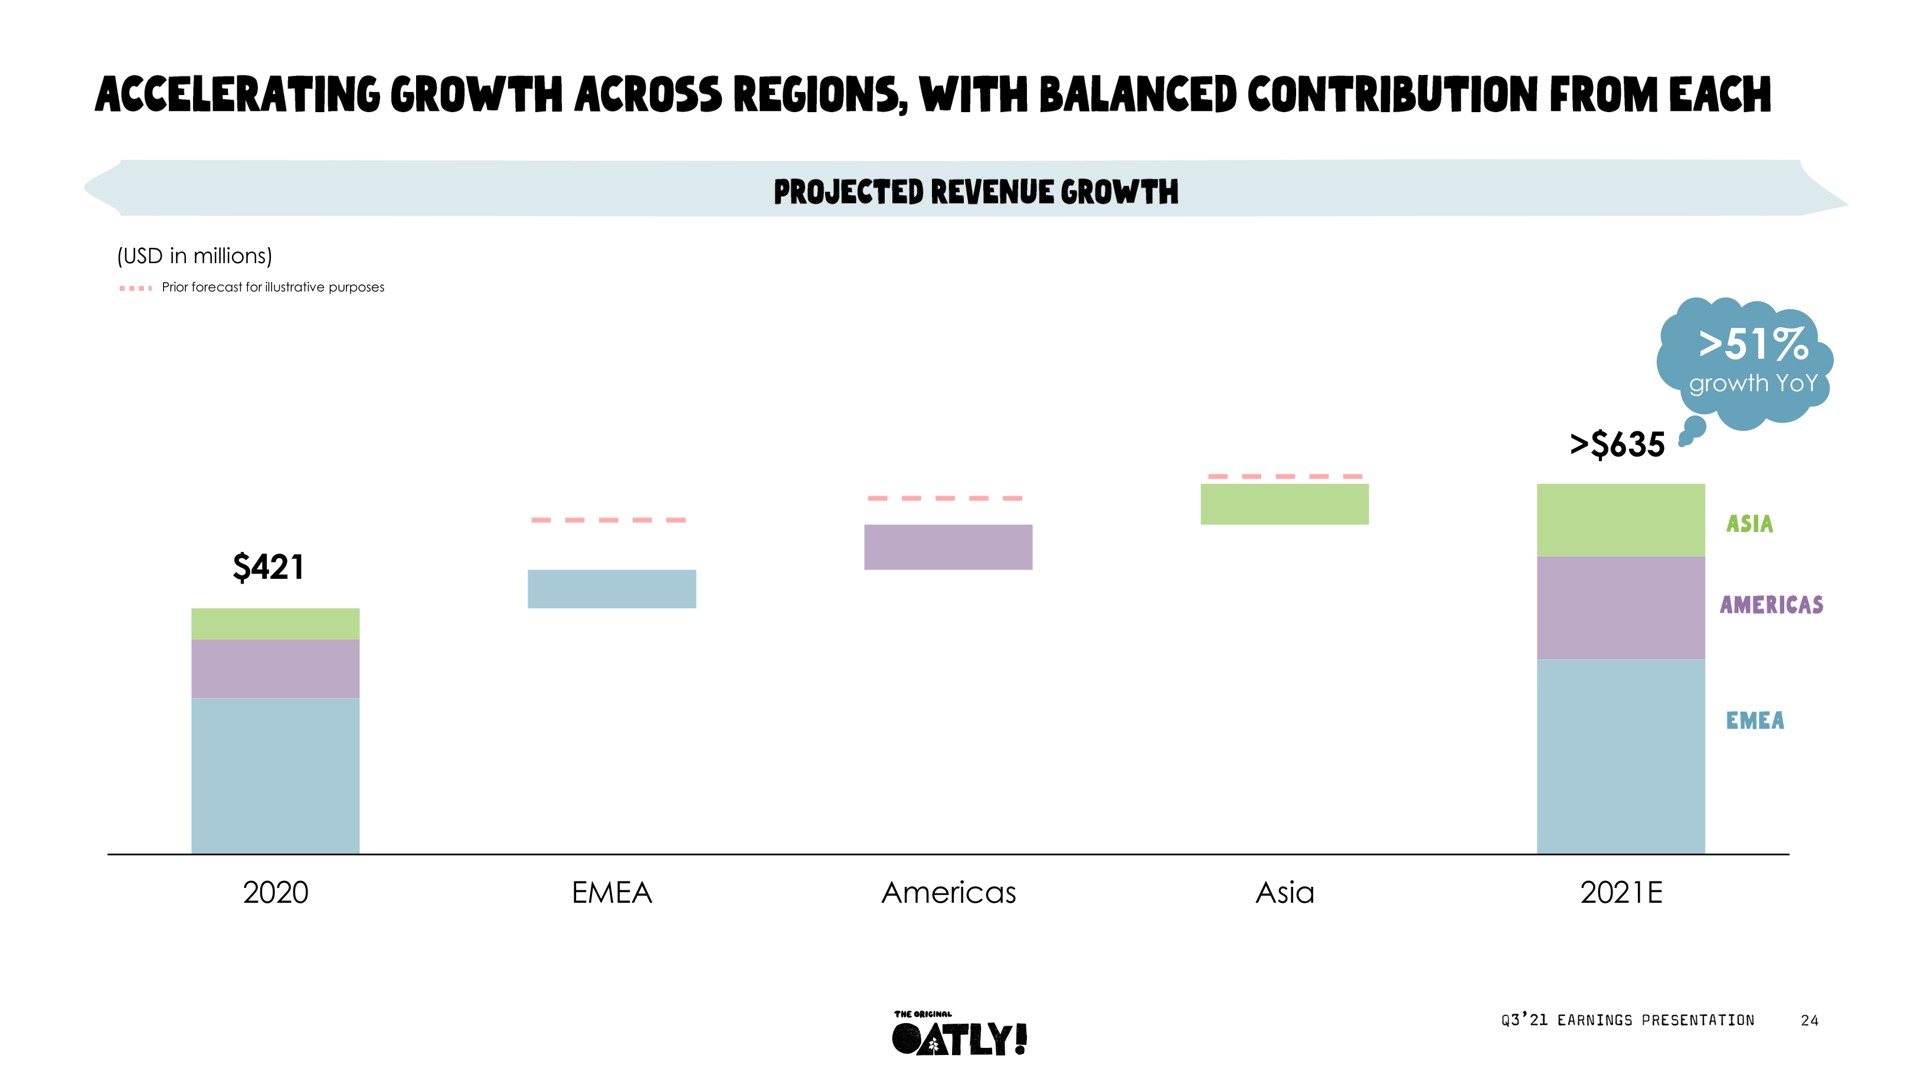 growth yoy accelerating across regions with balanced contribution from each | Oatly